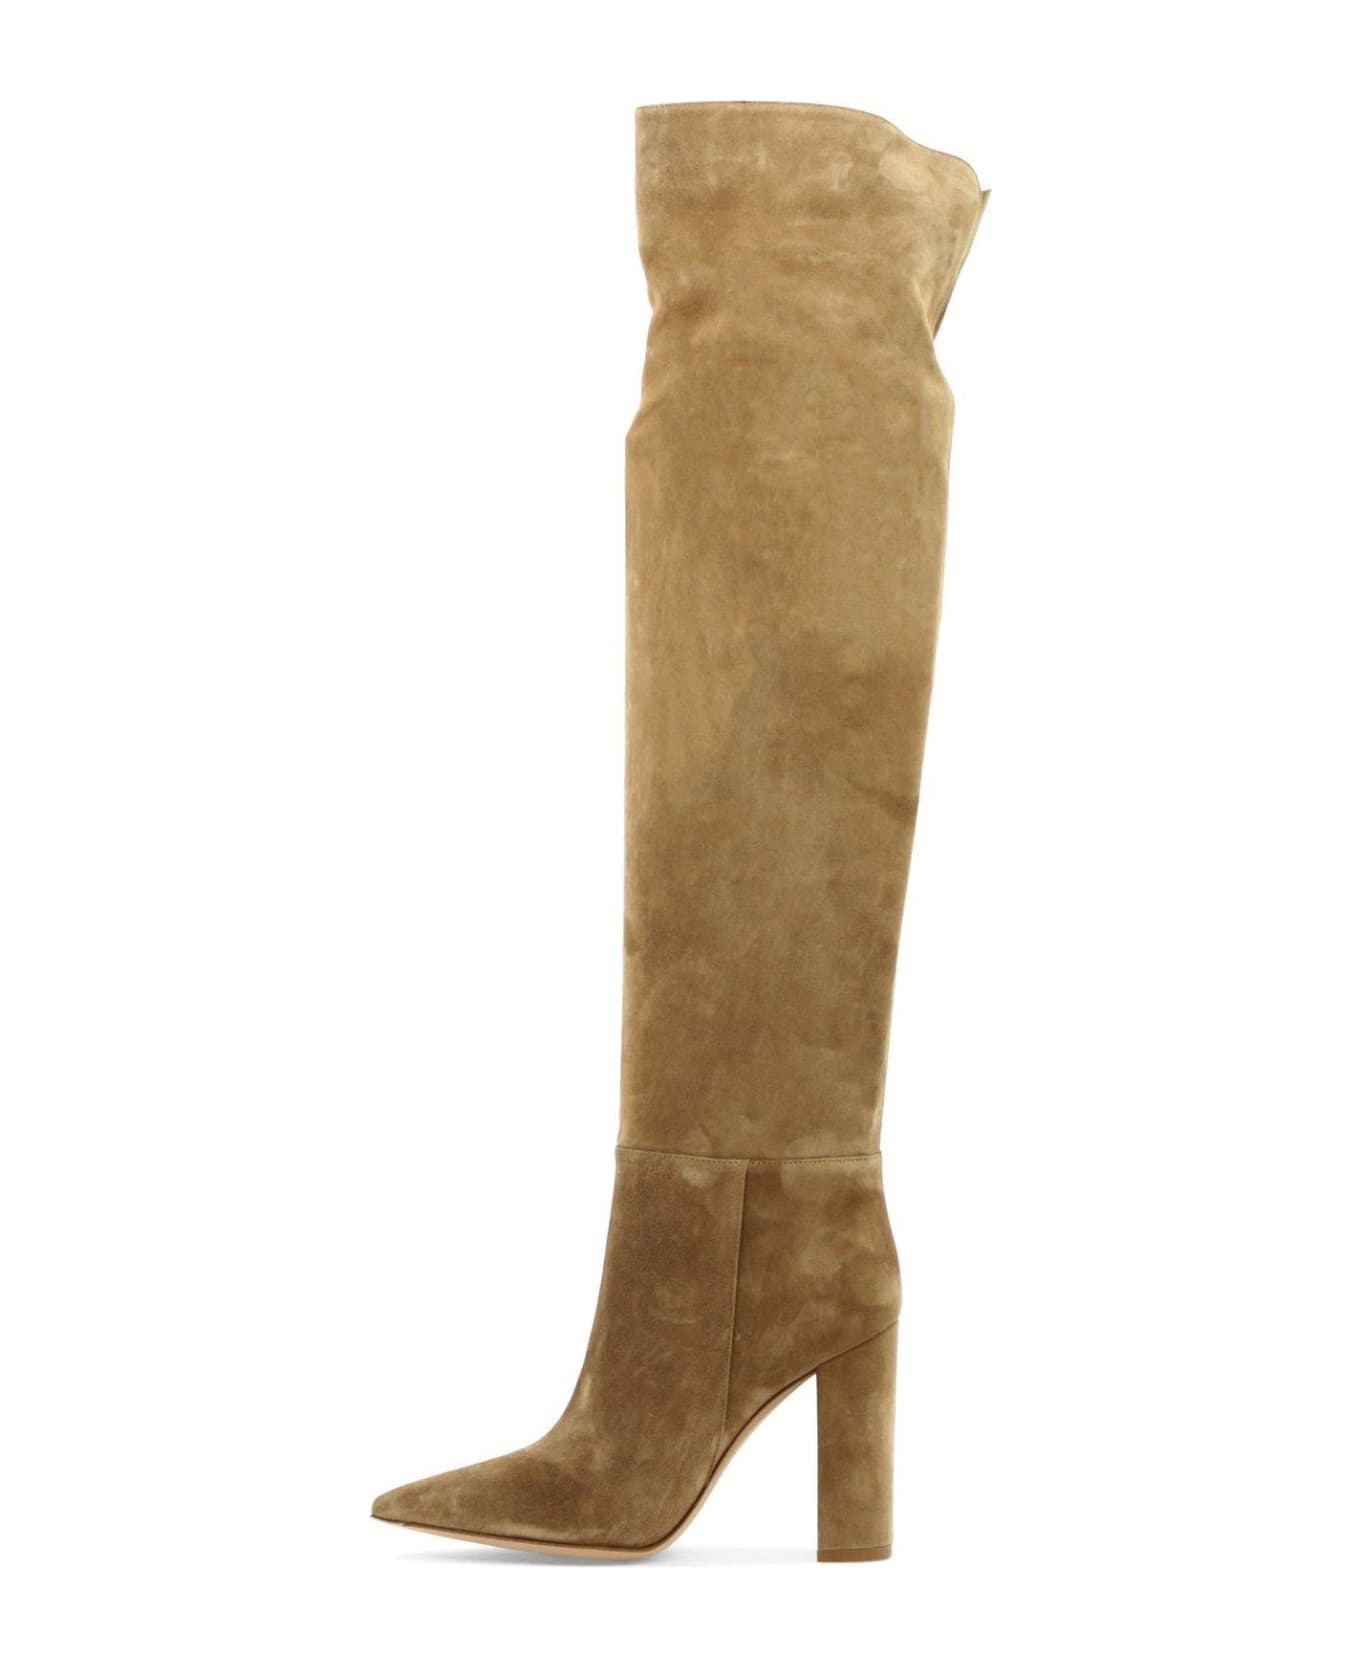 Gianvito Rossi Pointed-toe Heeled Boots - CAMEL ブーツ